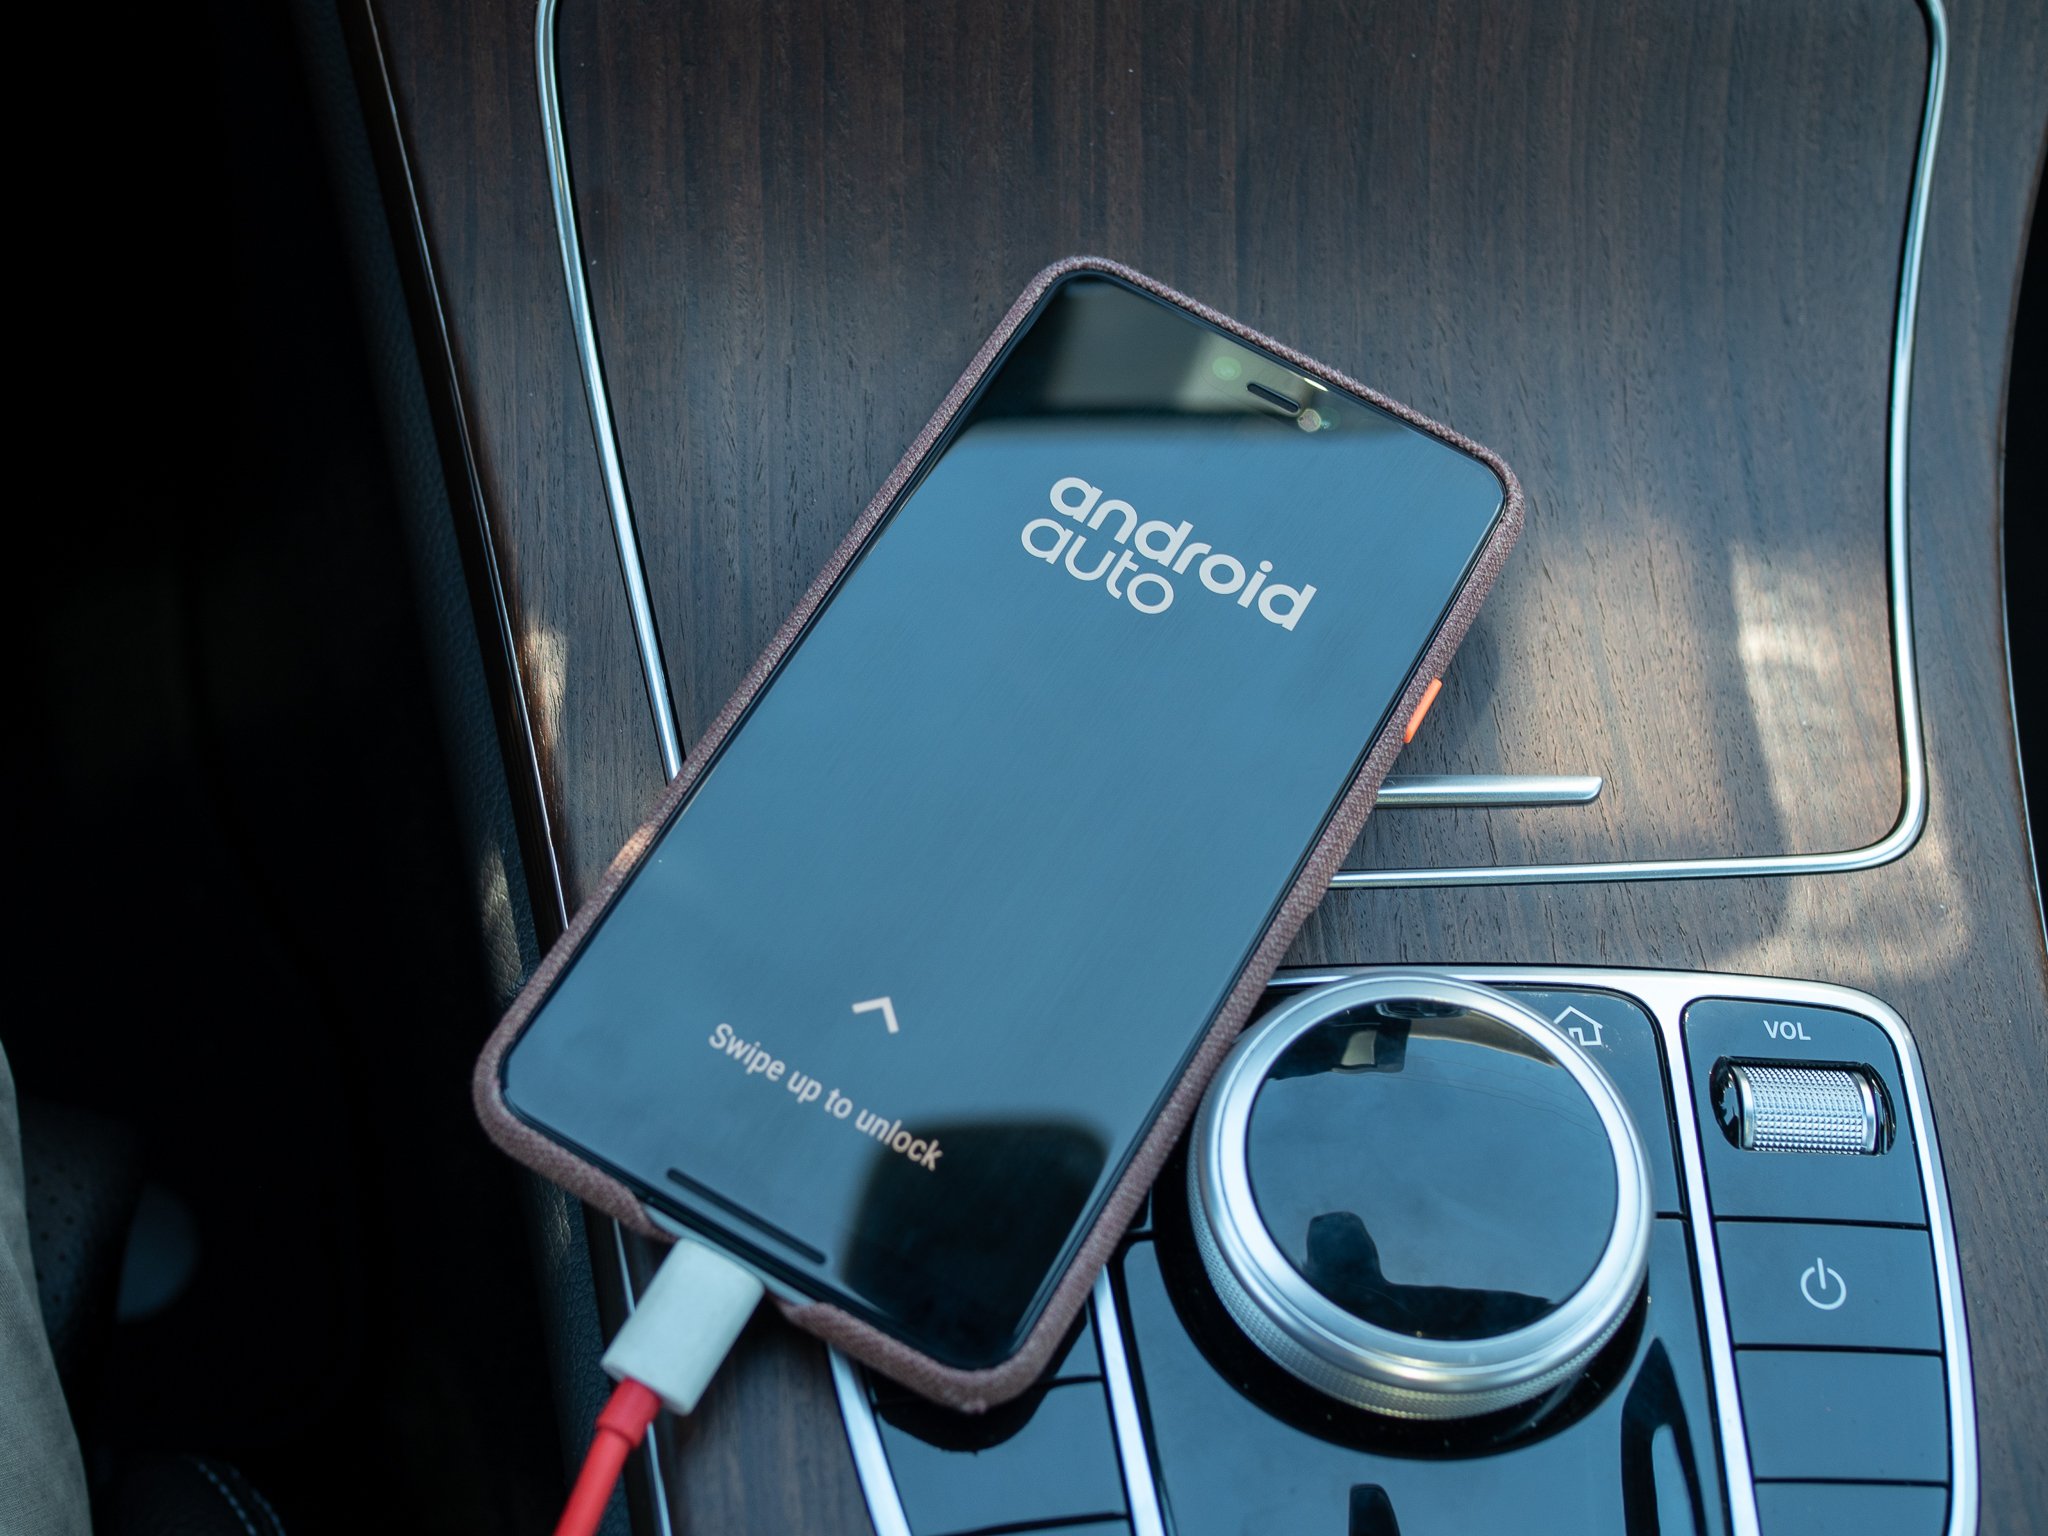 https://www.androidcentral.com/sites/androidcentral.com/files/styles/large_wm_brw/public/article_images/2019/07/android-auto-on-phone-plugged-in.jpg?itok=KQM5S9dW